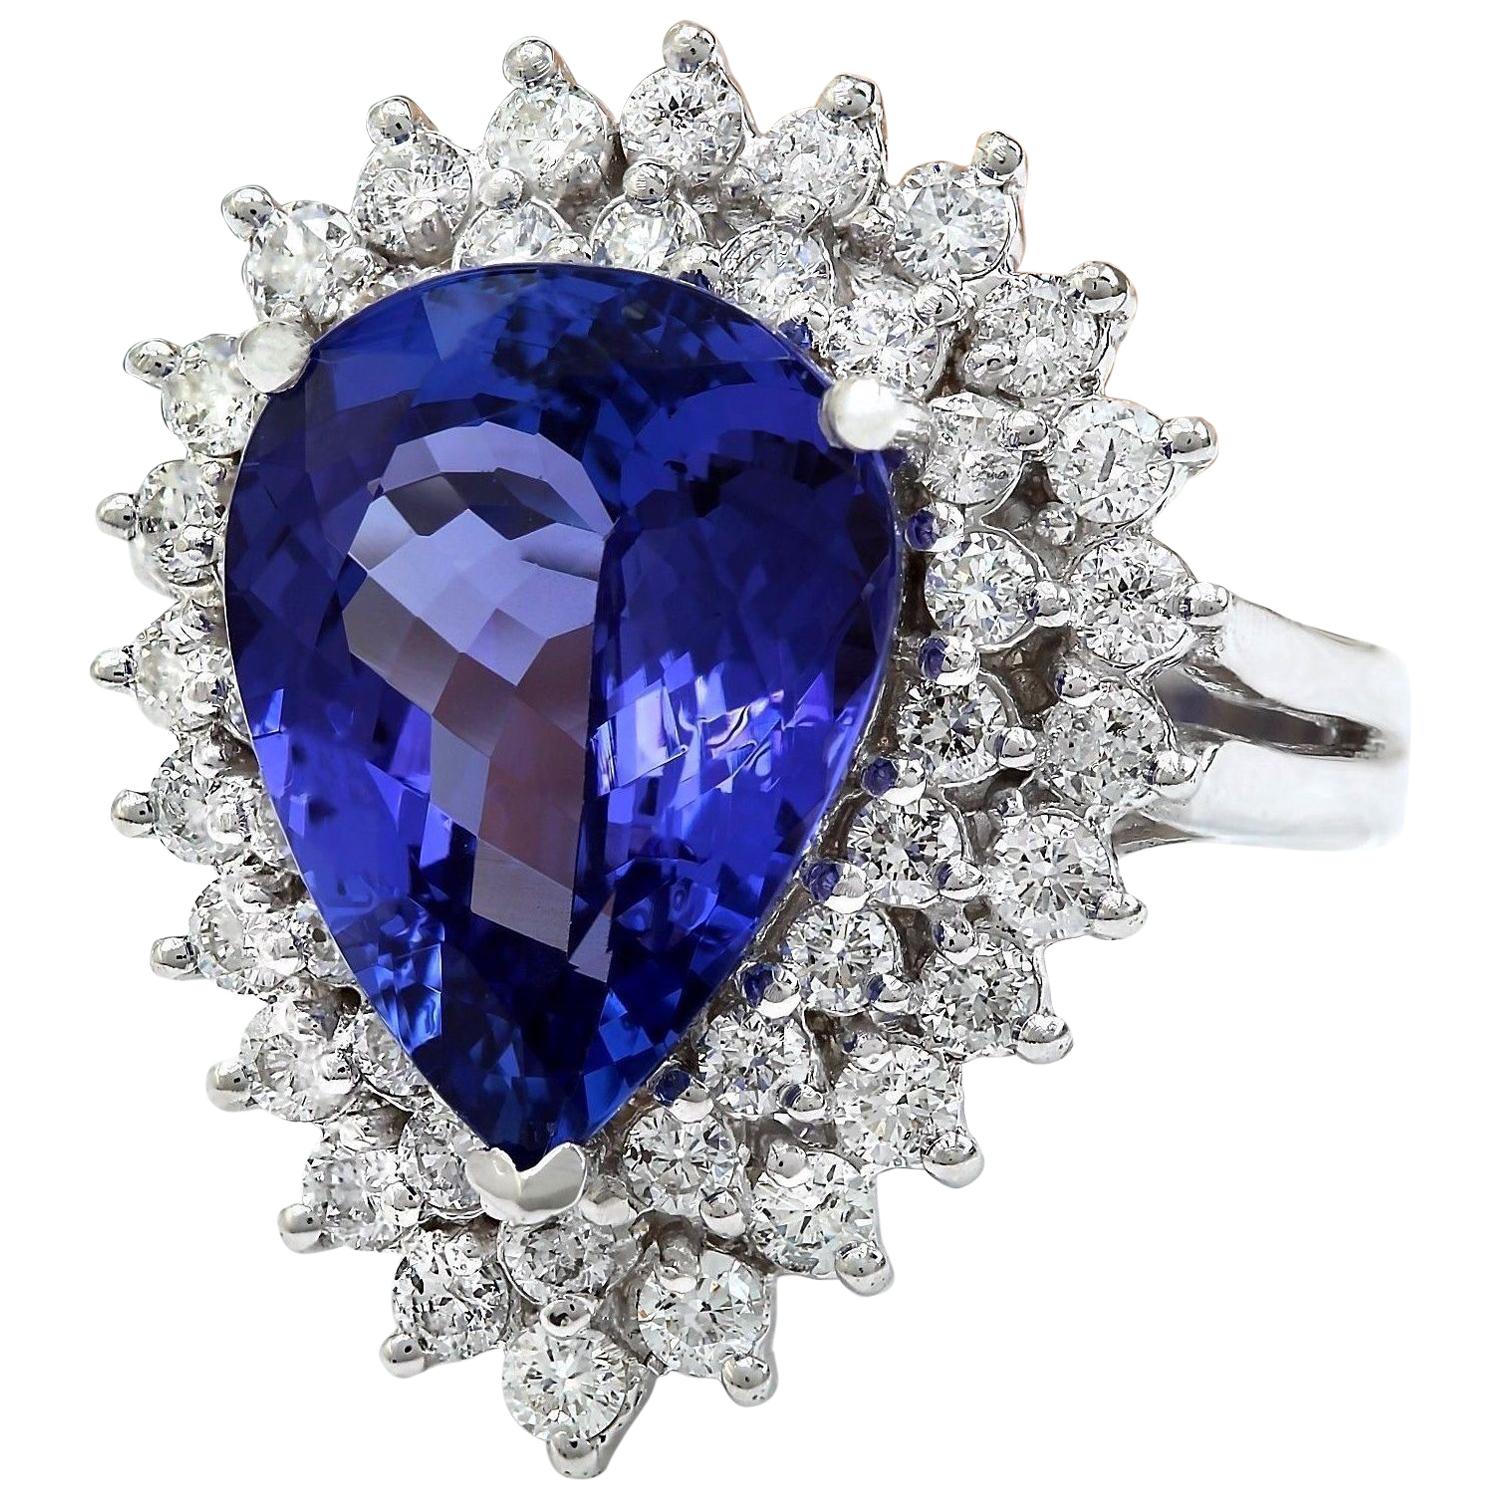 7.51 Carat  Tanzanite 14K Solid White Gold Diamond Ring
Item Type: Ring
Item Style: Cocktail
Material: 14K White Gold
Mainstone: Tanzanite
Stone Color: Blue
Stone Weight: 6.26 Carat
Stone Shape: Pear
Stone Quantity: 1
Stone Dimensions: 14.00x10.03